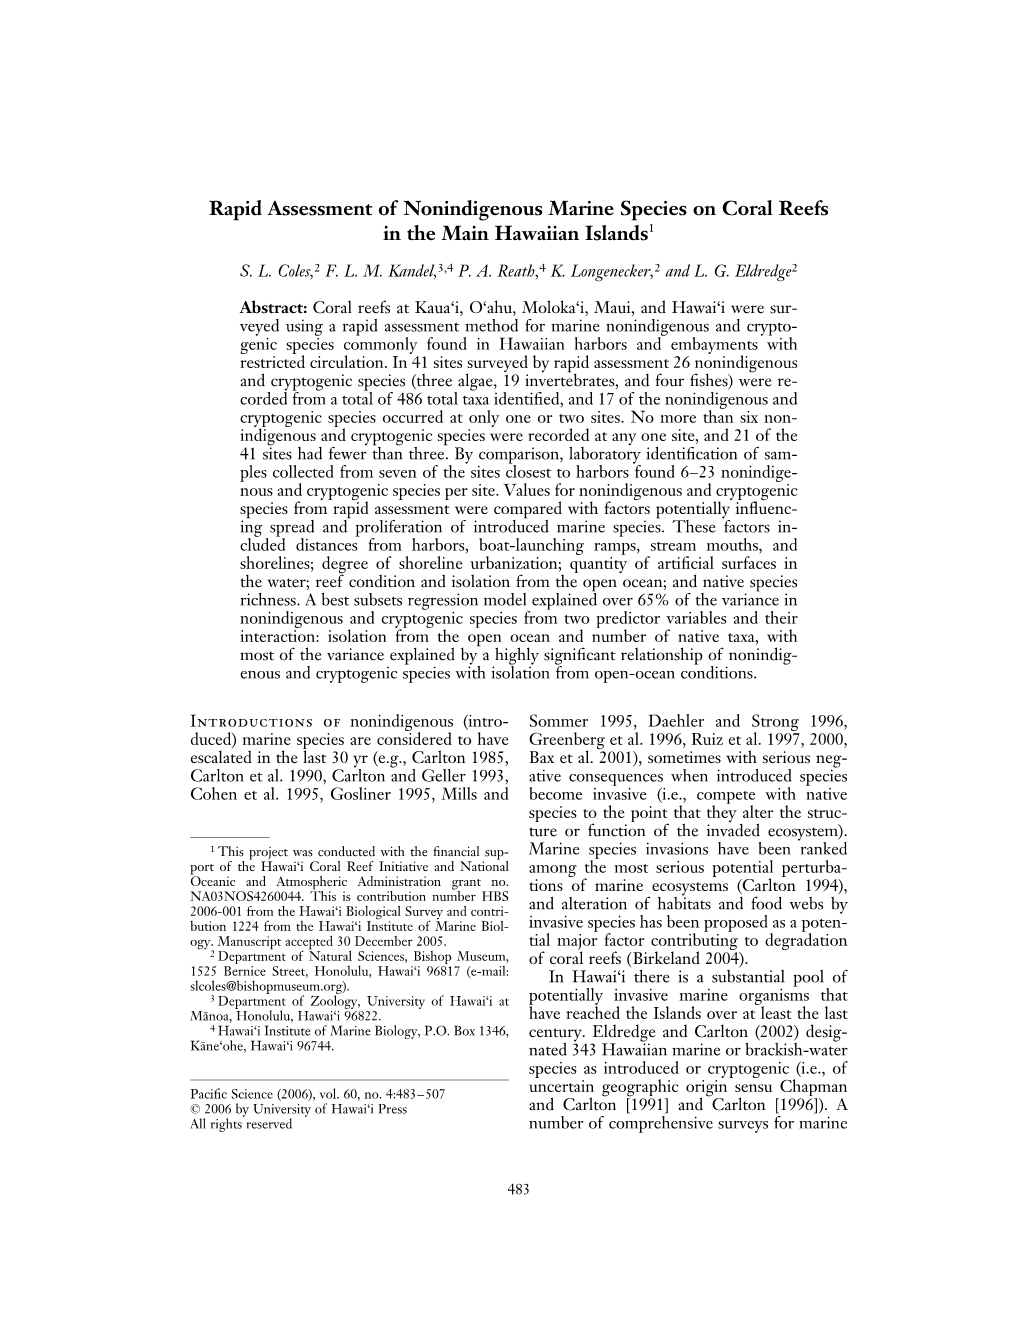 Rapid Assessment of Nonindigenous Marine Species on Coral Reefs in the Main Hawaiian Islands1